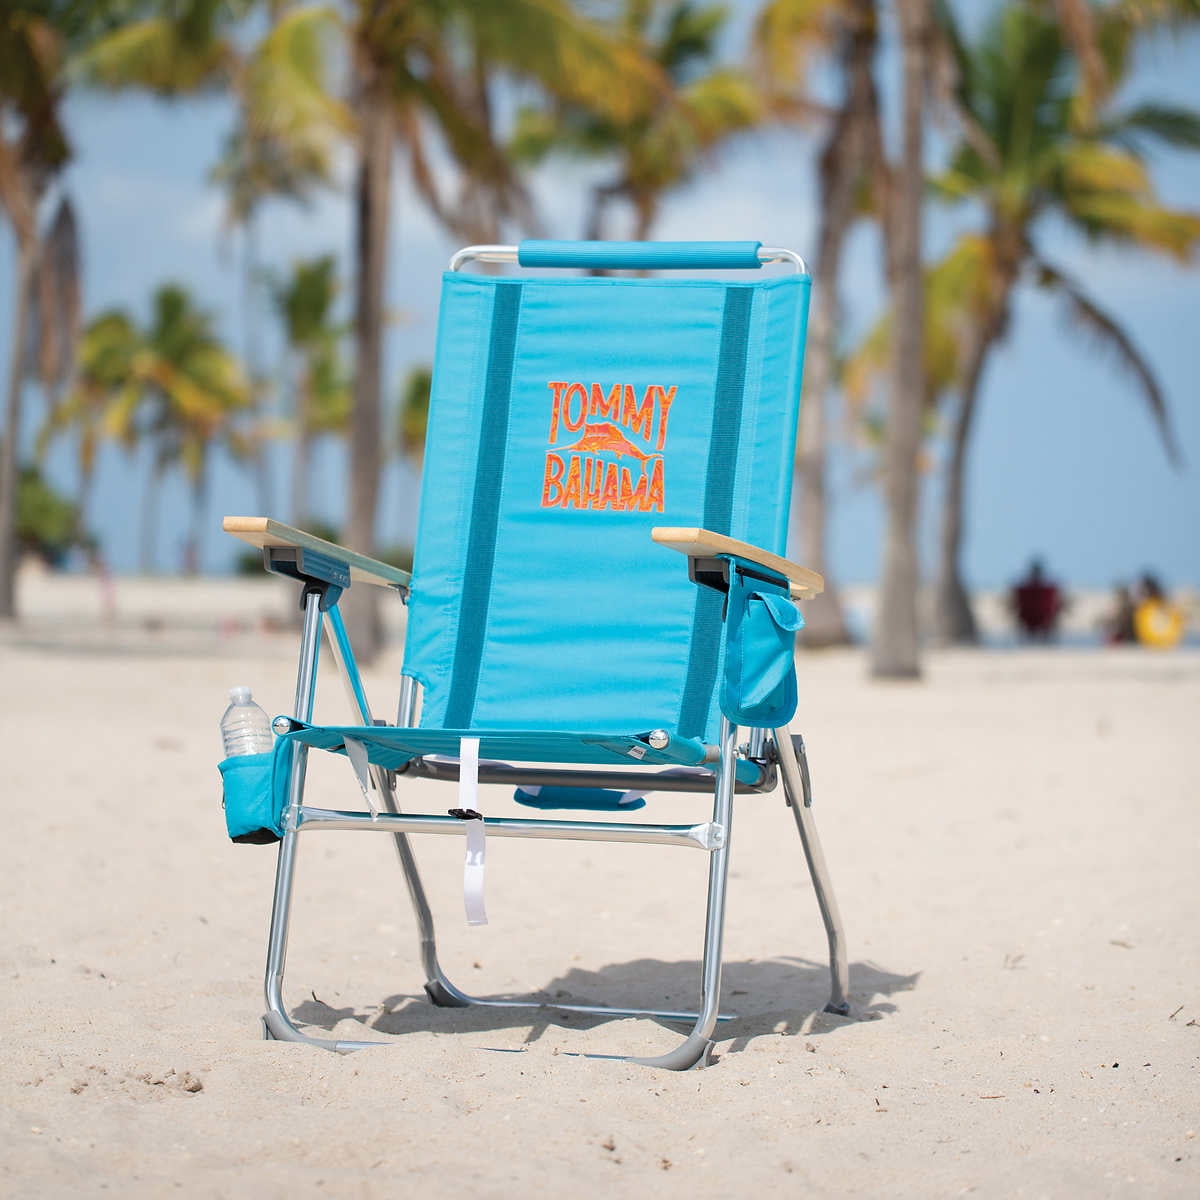 Simple How To Recline Tommy Bahama Beach Chair for Large Space